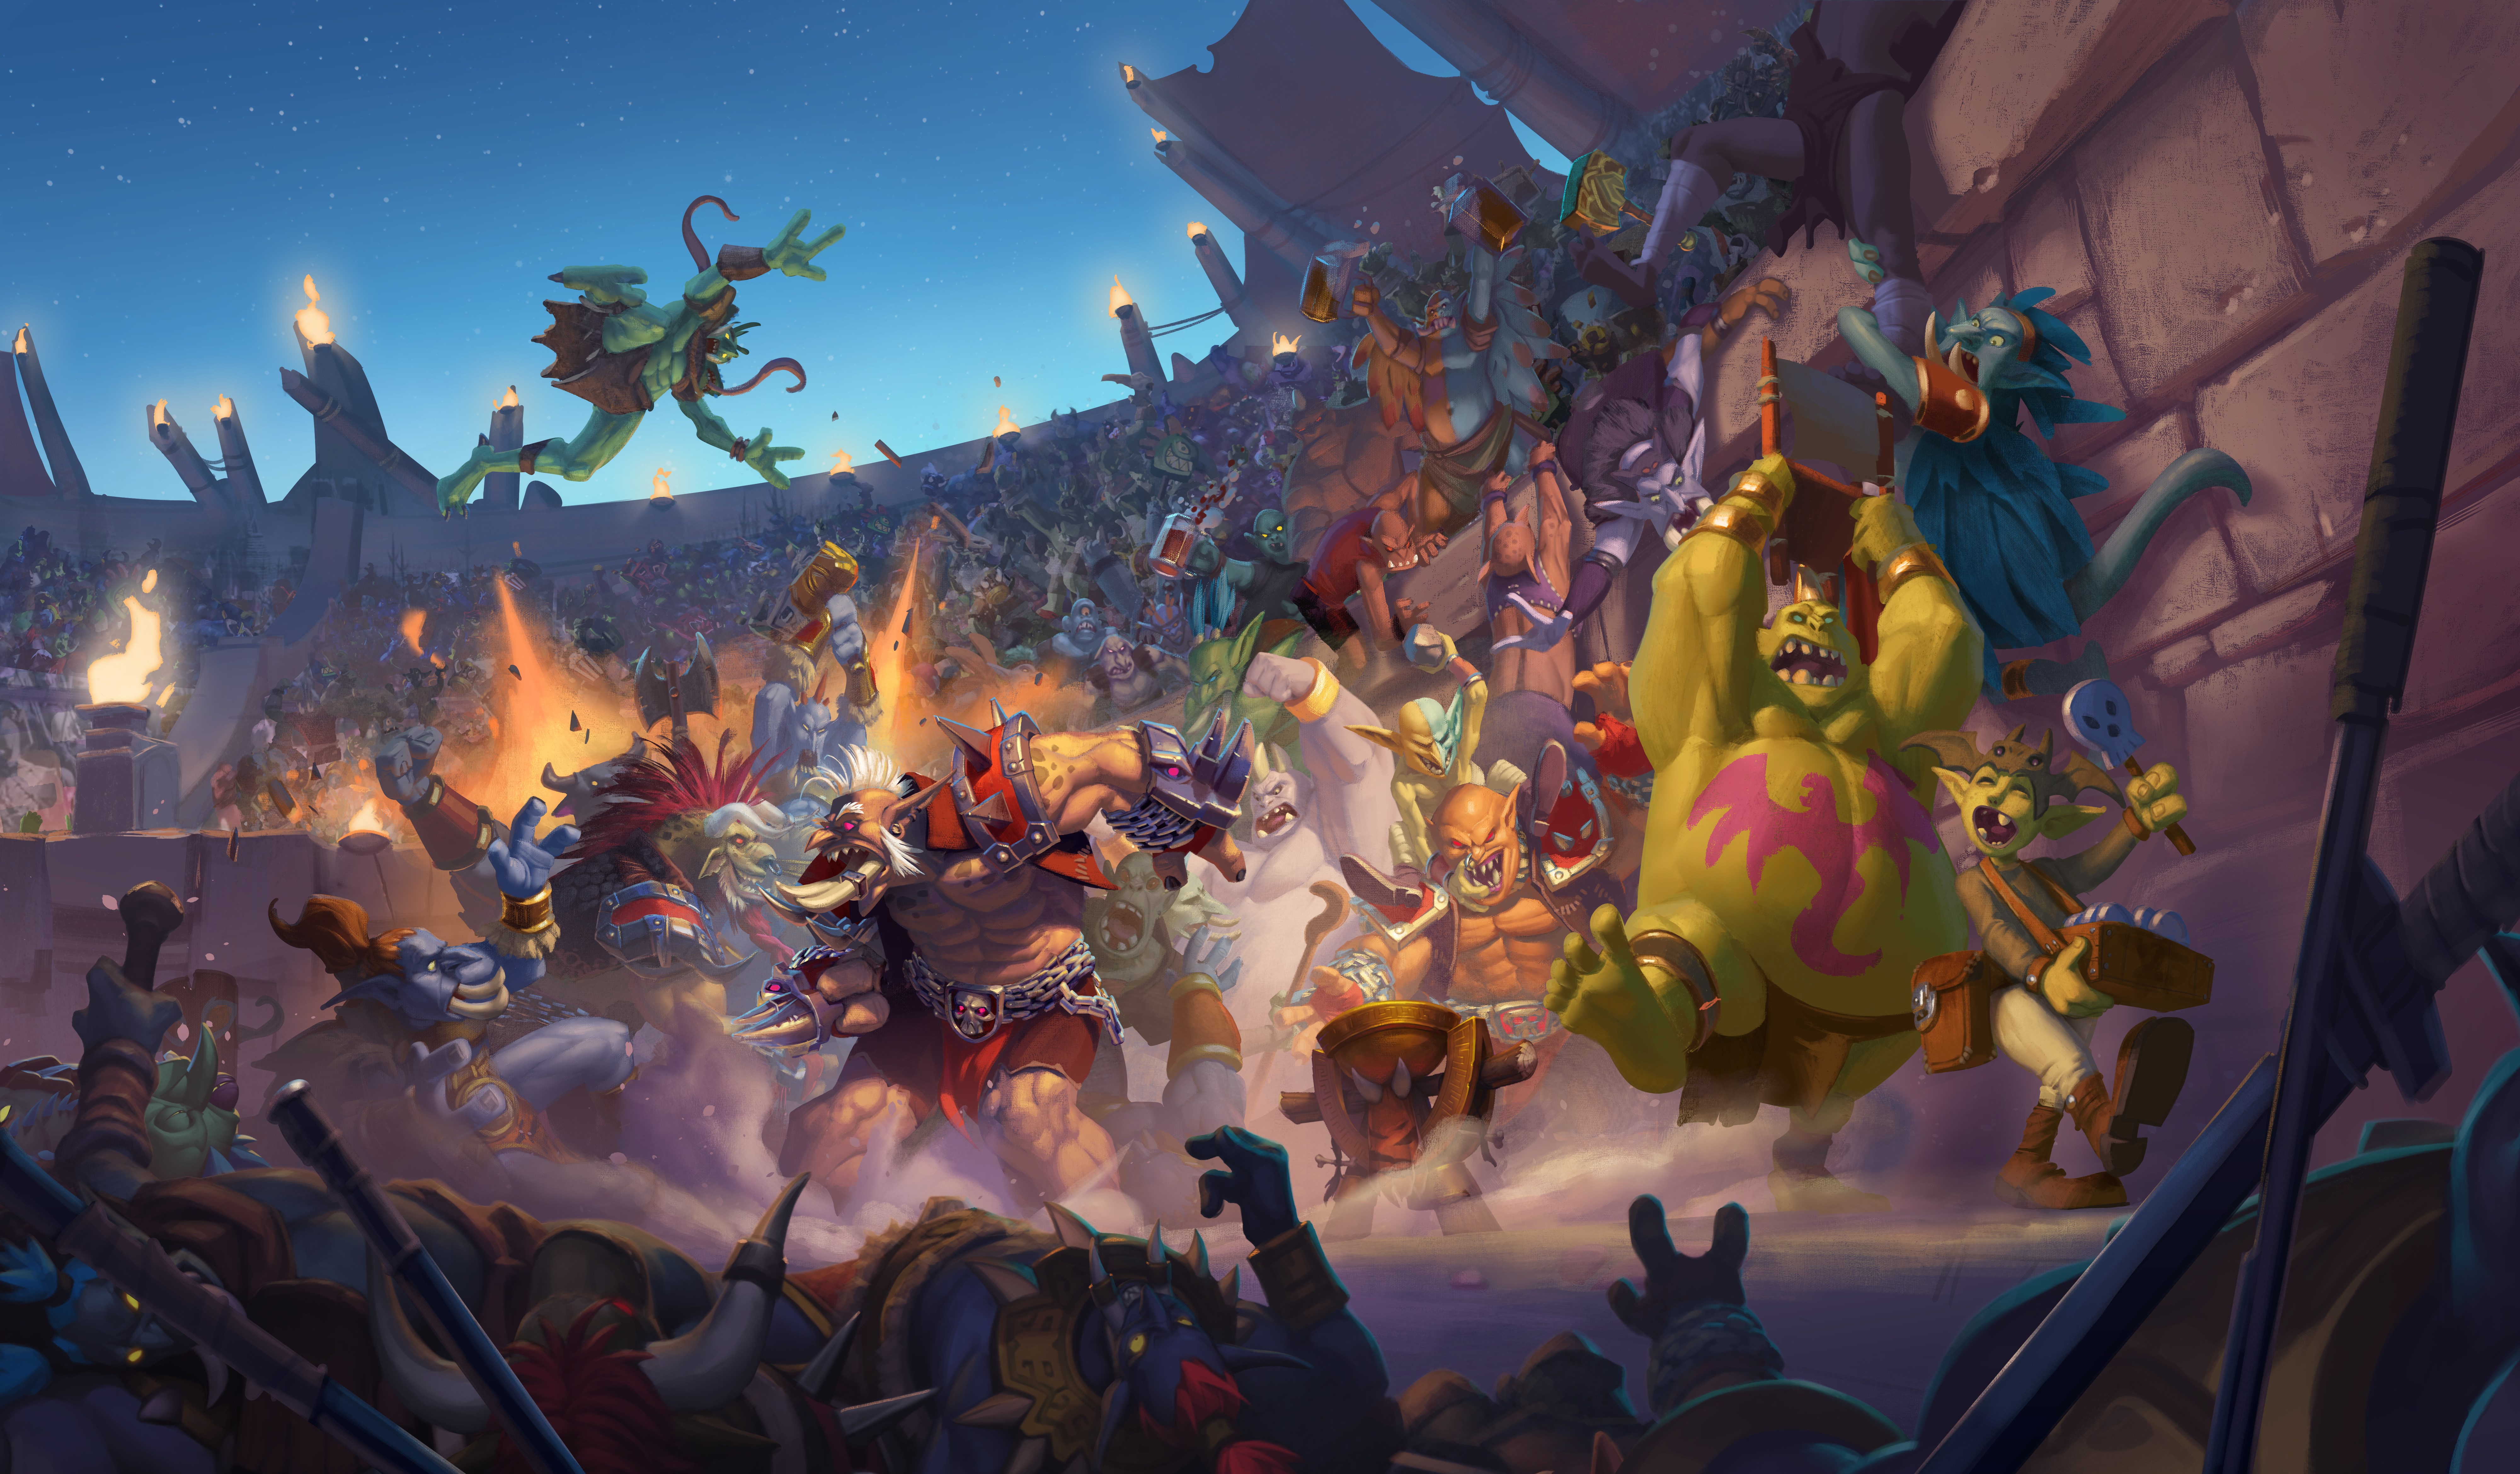 Free Download Wallpaper Rastakhans Rumble Hearthstone 8000x4679 Netghy 8000x4679 For Your Desktop Mobile Tablet Explore 28 Hearthstone Wallpaper Hearthstone Rogue Wallpaper Wallpaper Illusions Hearthstone Multi Sale Hearthstone Heroes Of